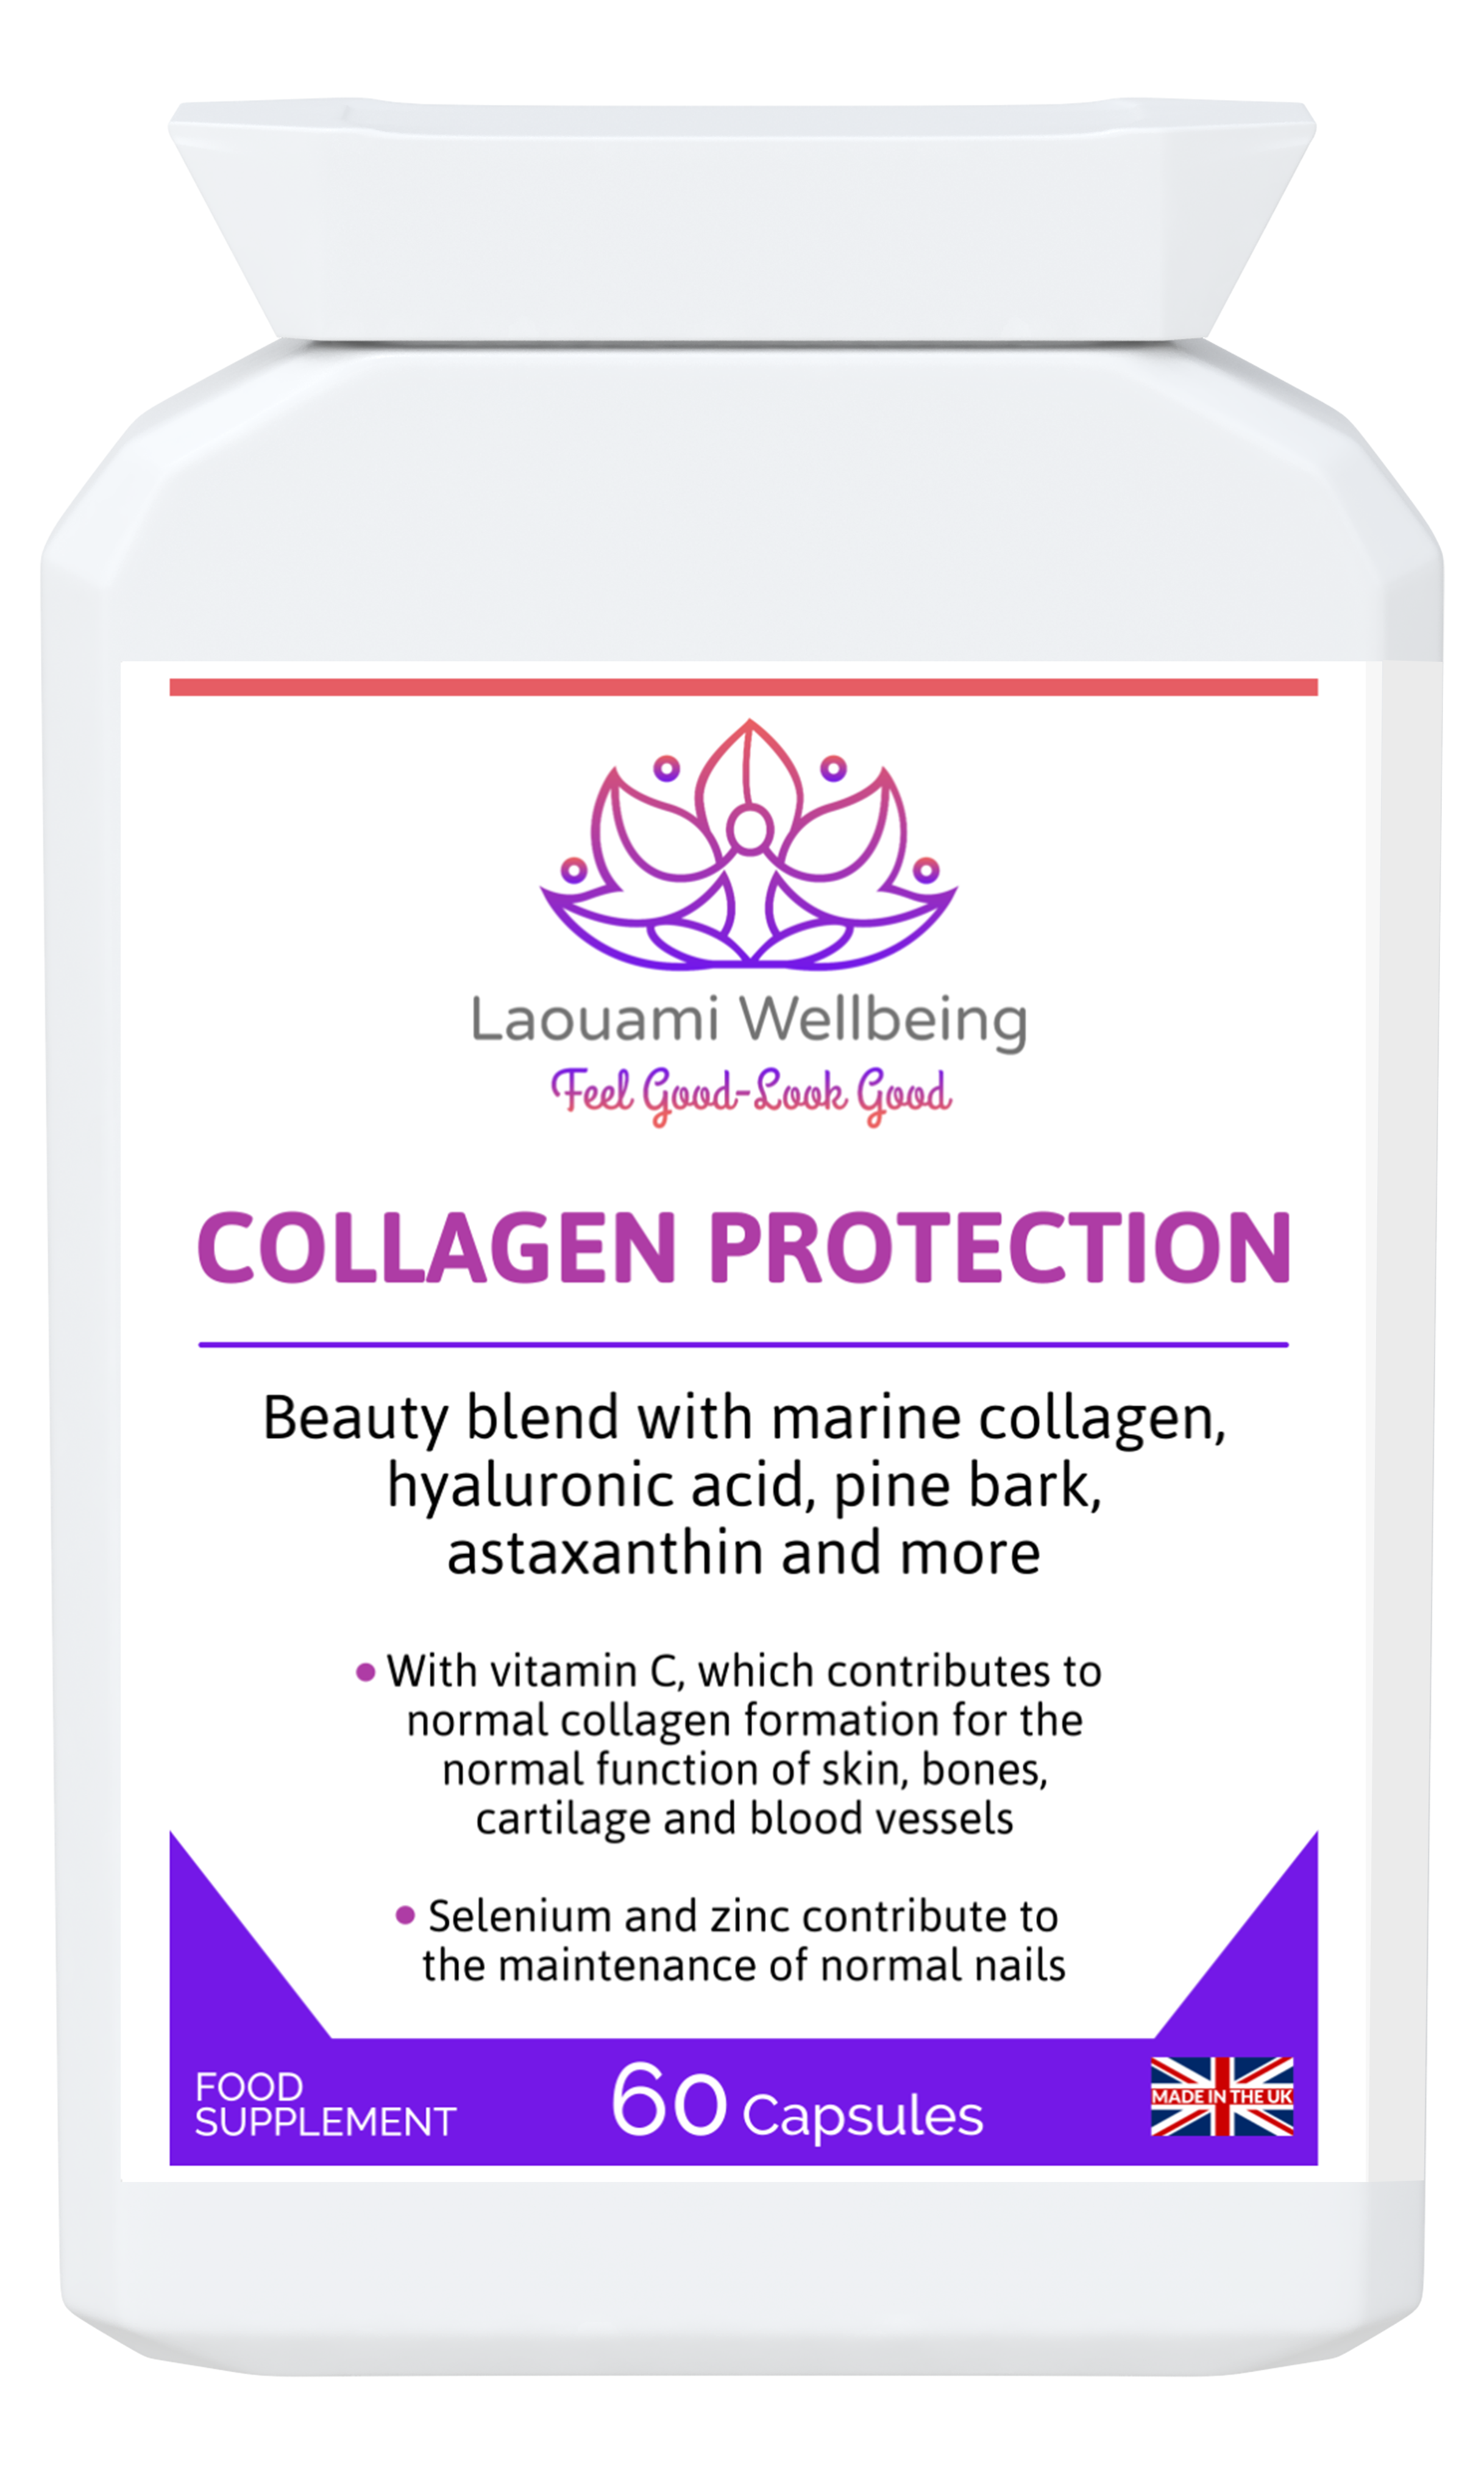 COLLAGEN PROTECTION